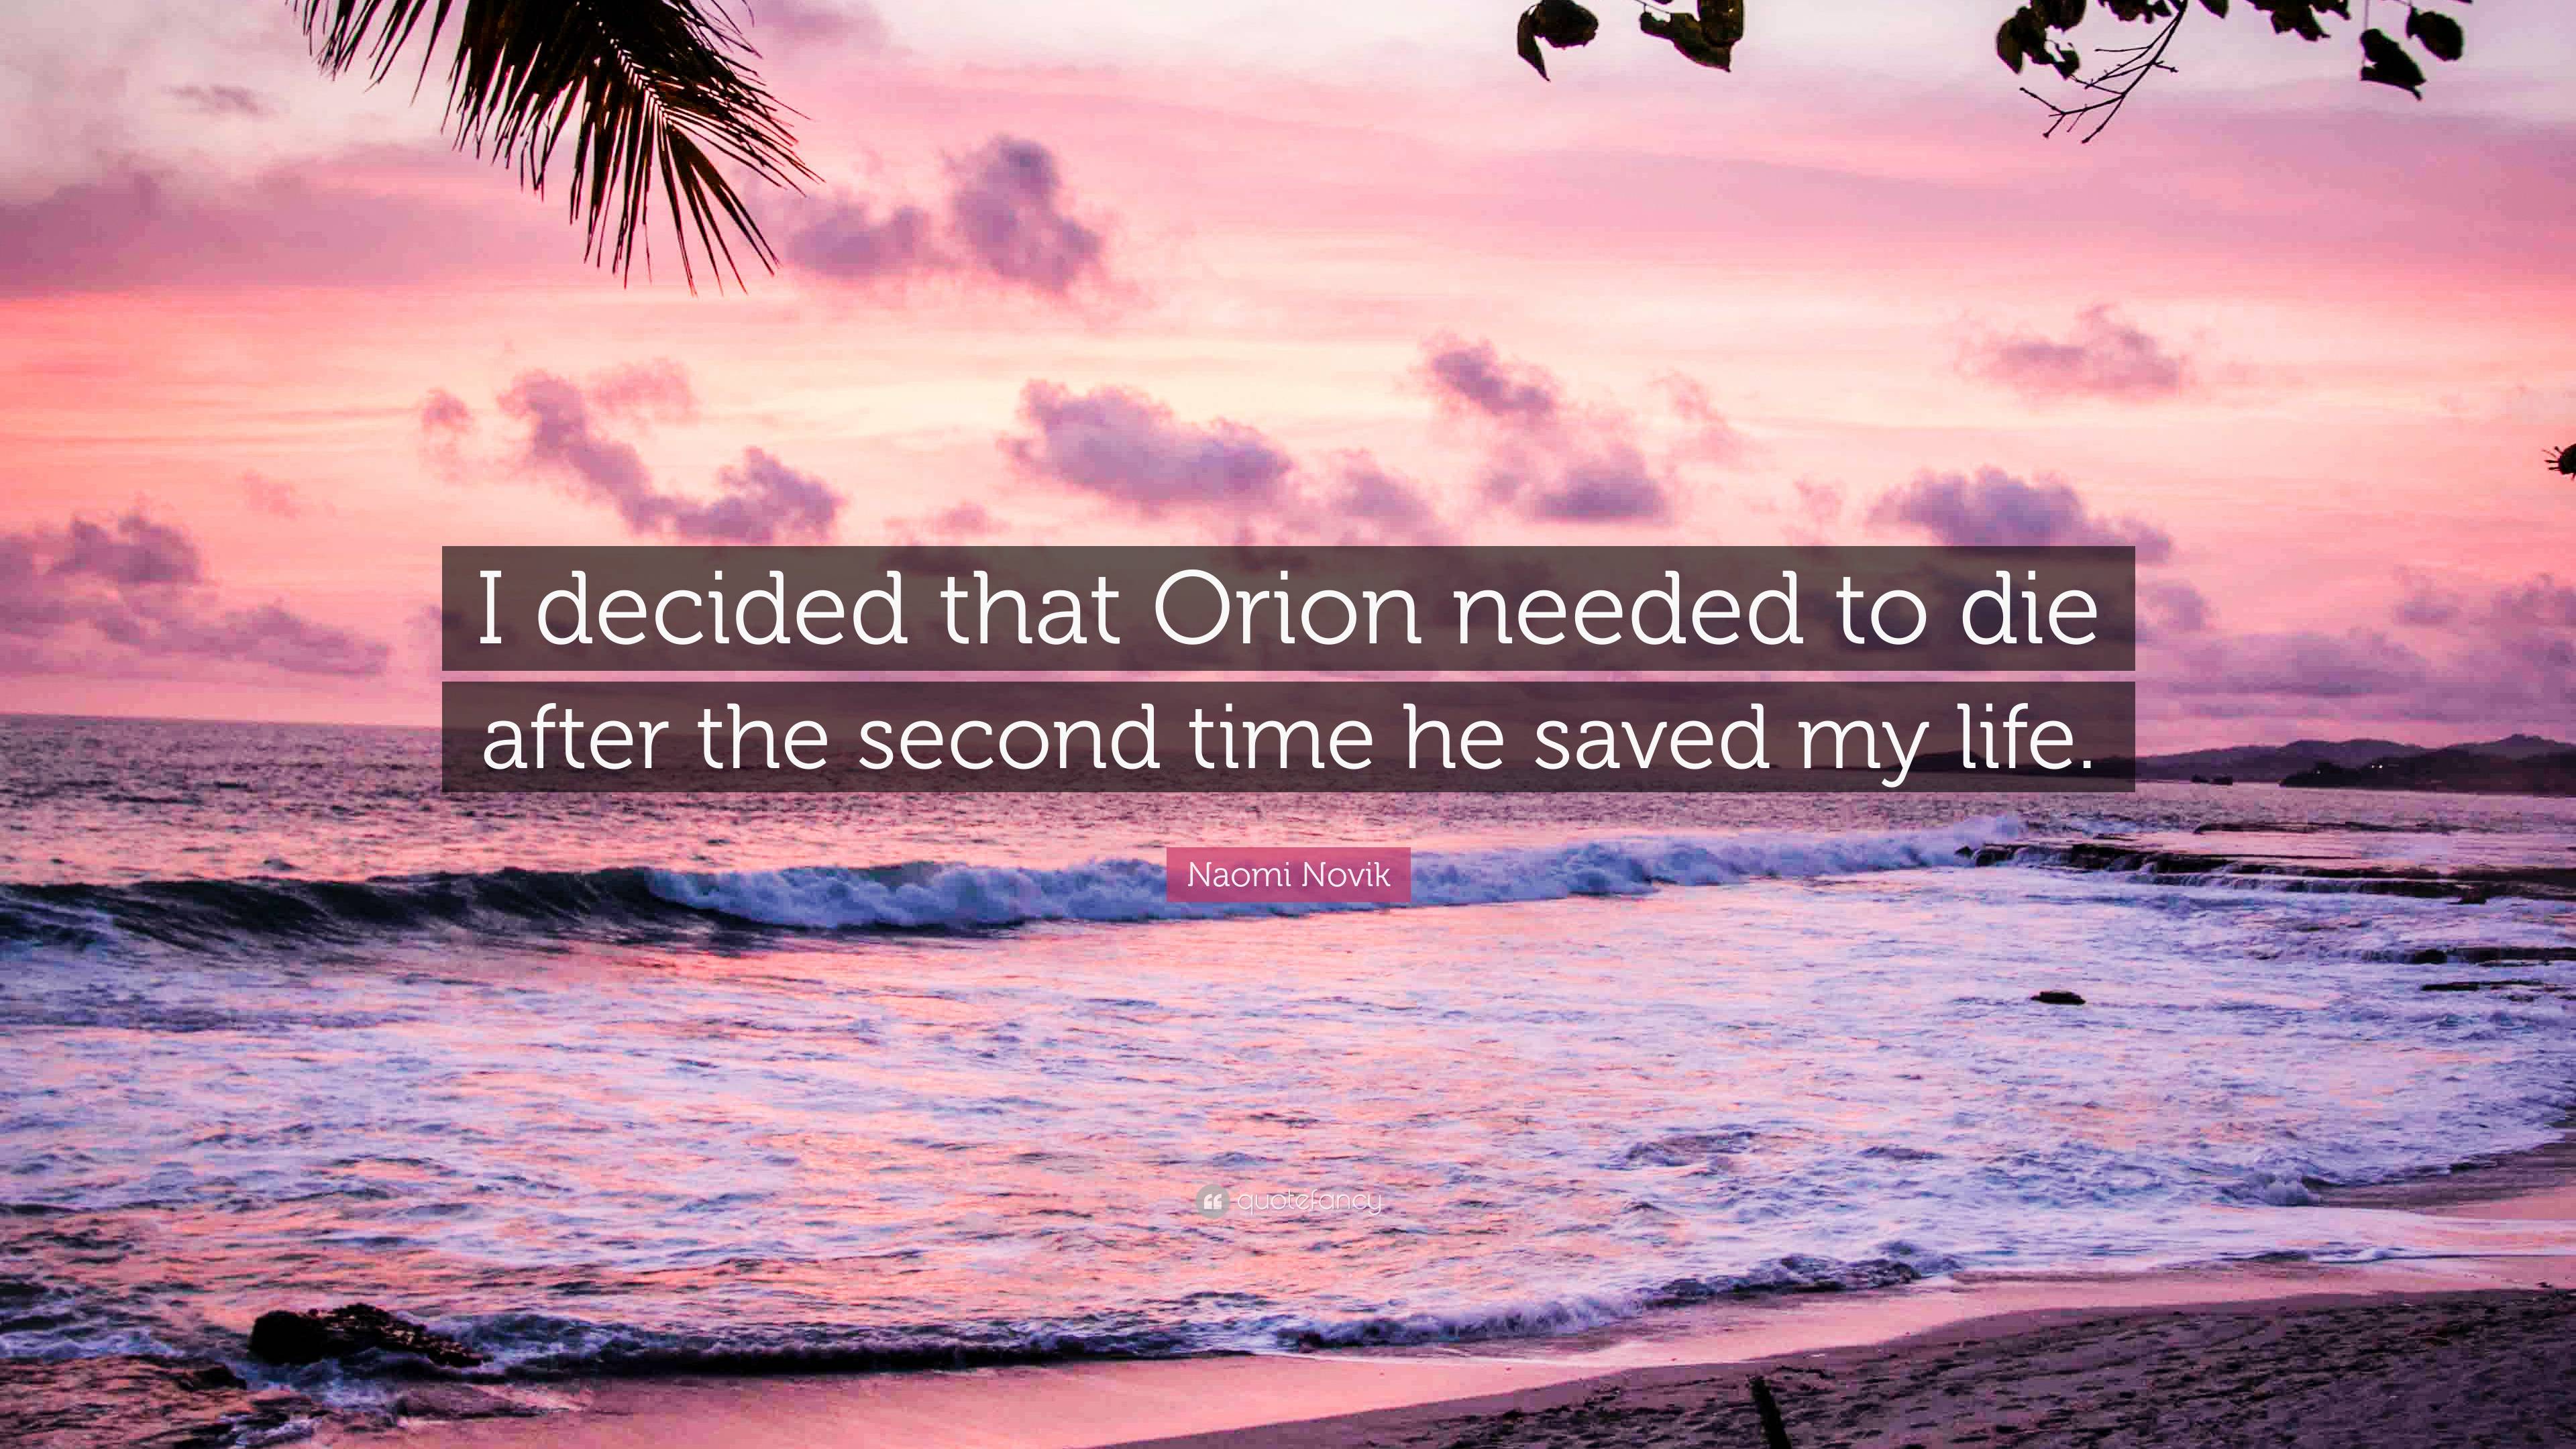 Naomi Novik Quote: “I decided that Orion needed to die after the second ...